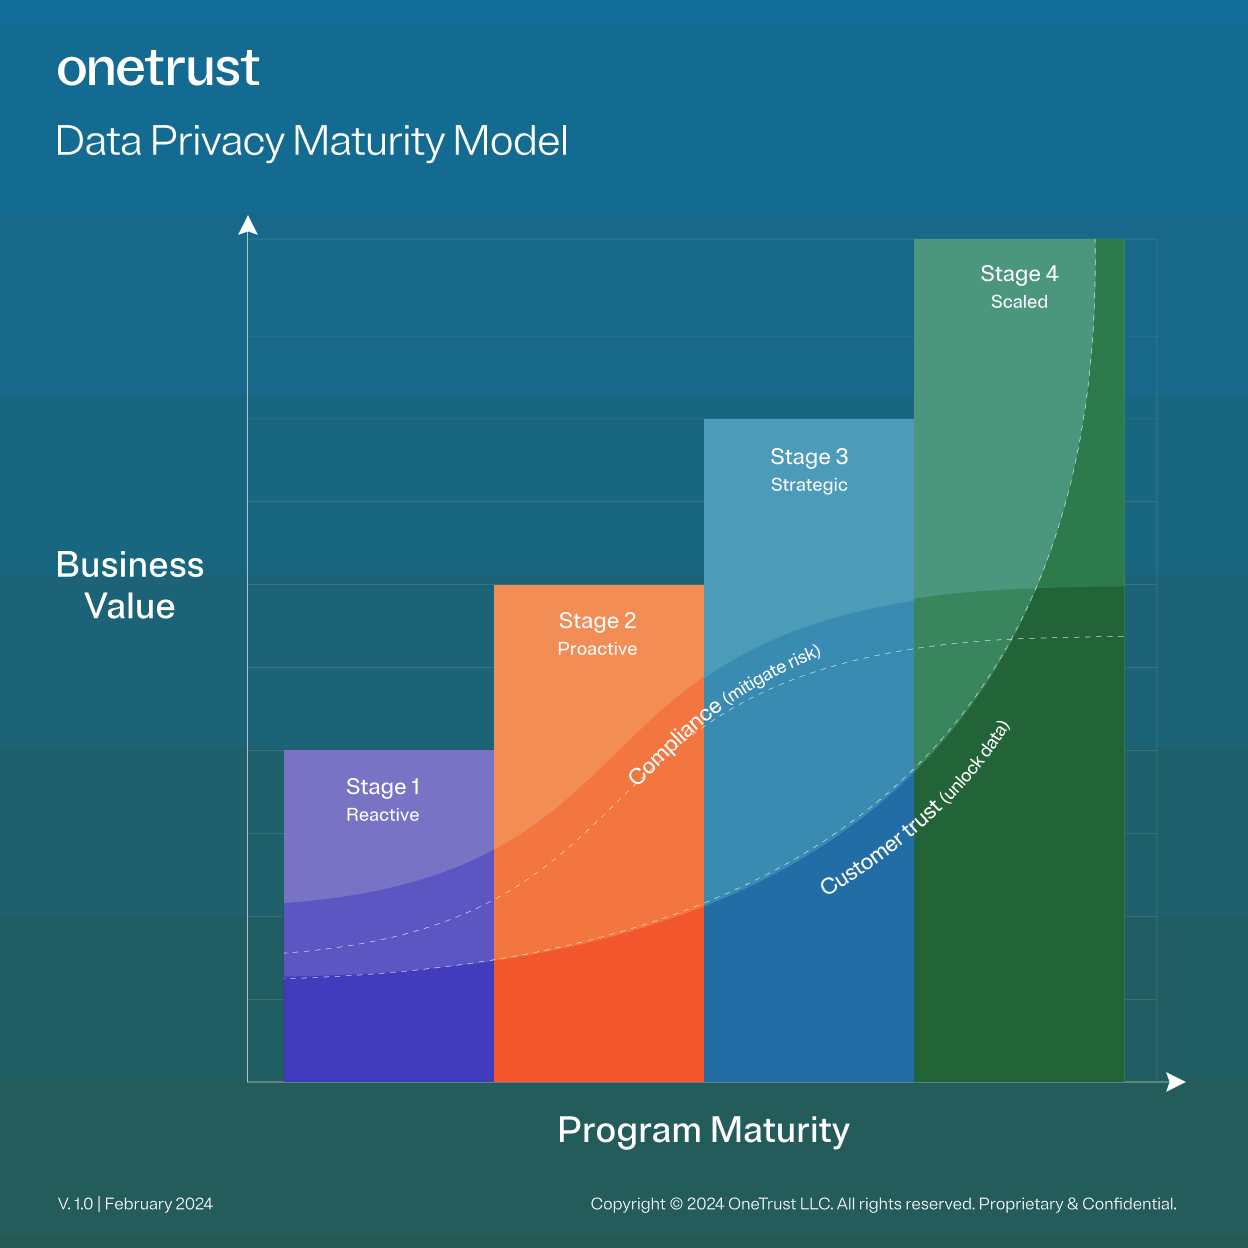 Image of OneTrust's Data Privacy Maturity Model, a bar chart illustrating the stages of business values over the course of a program's development into maturity